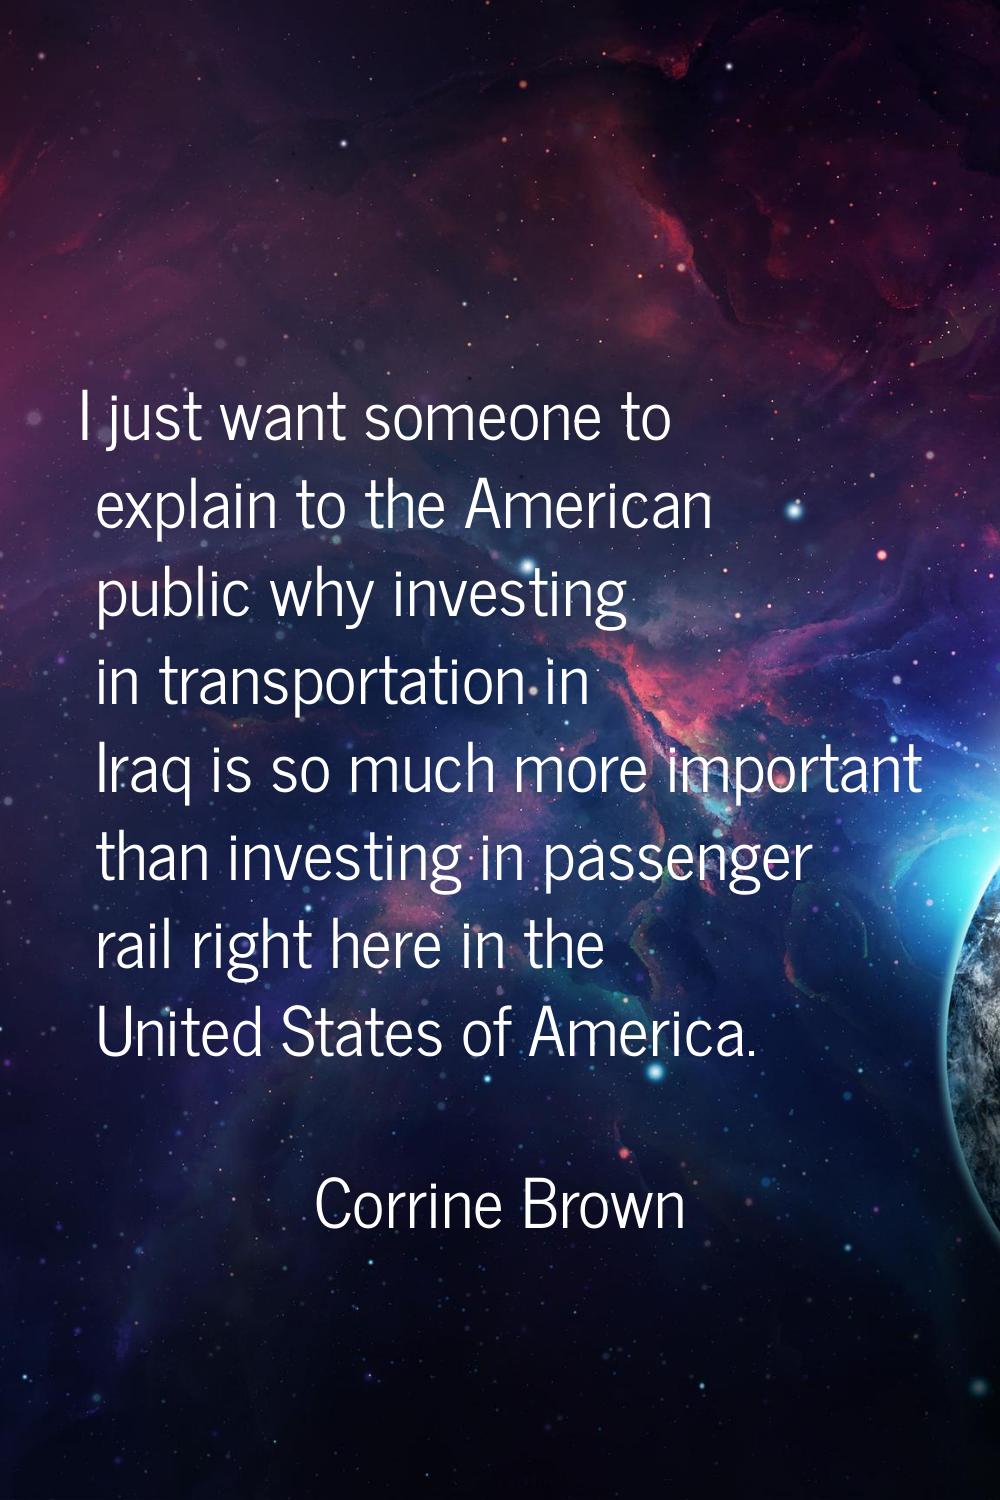 I just want someone to explain to the American public why investing in transportation in Iraq is so